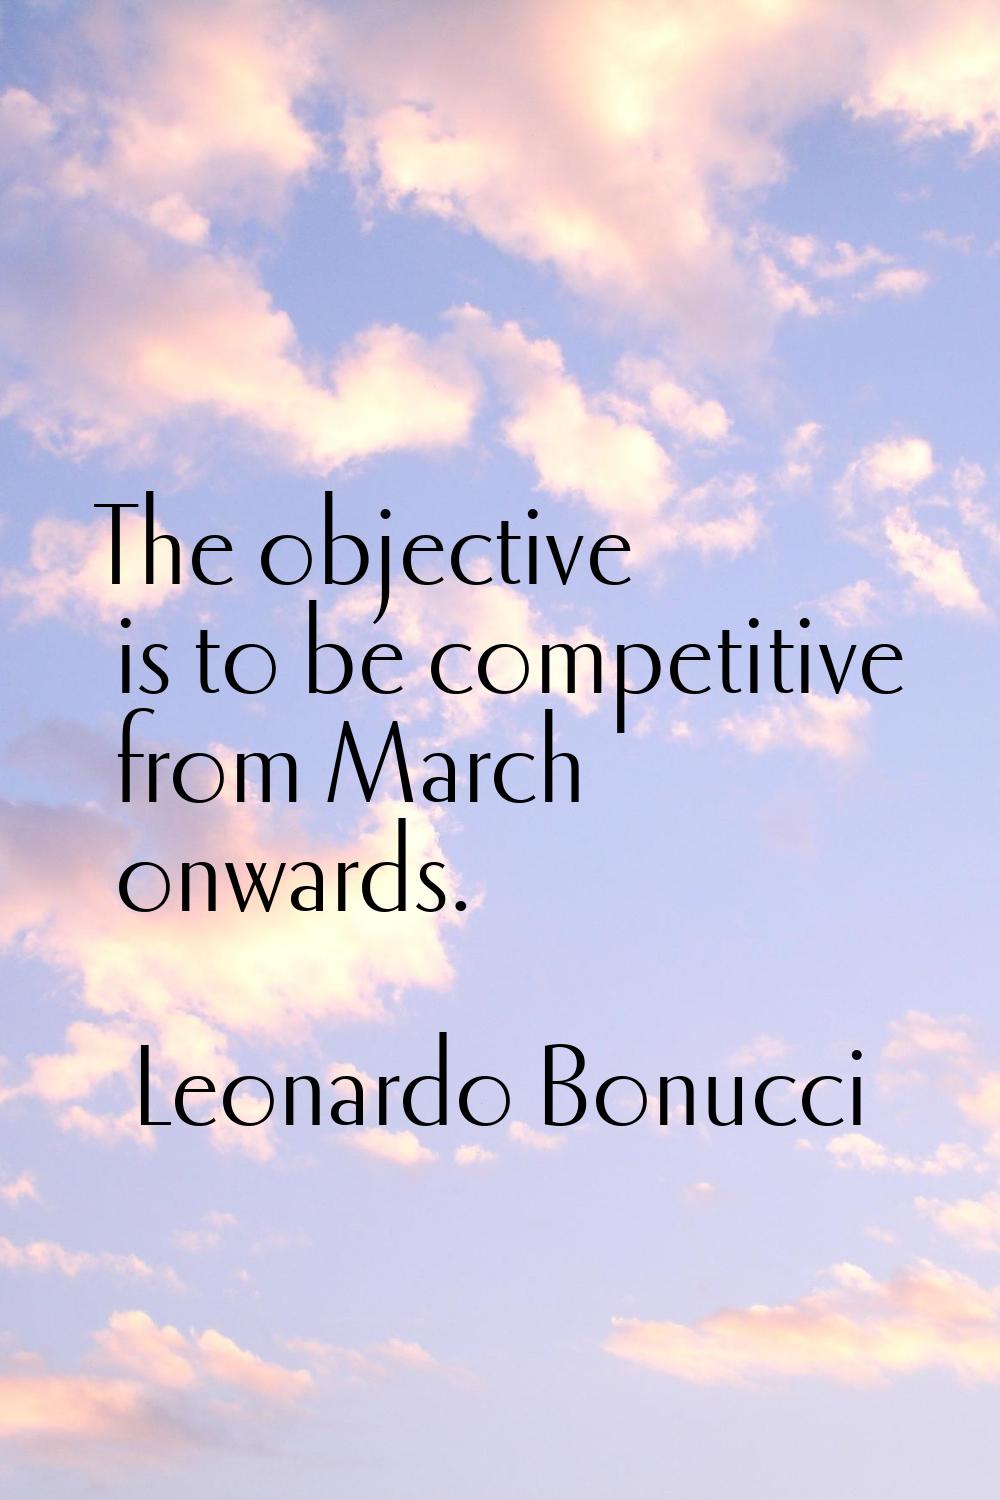 The objective is to be competitive from March onwards.